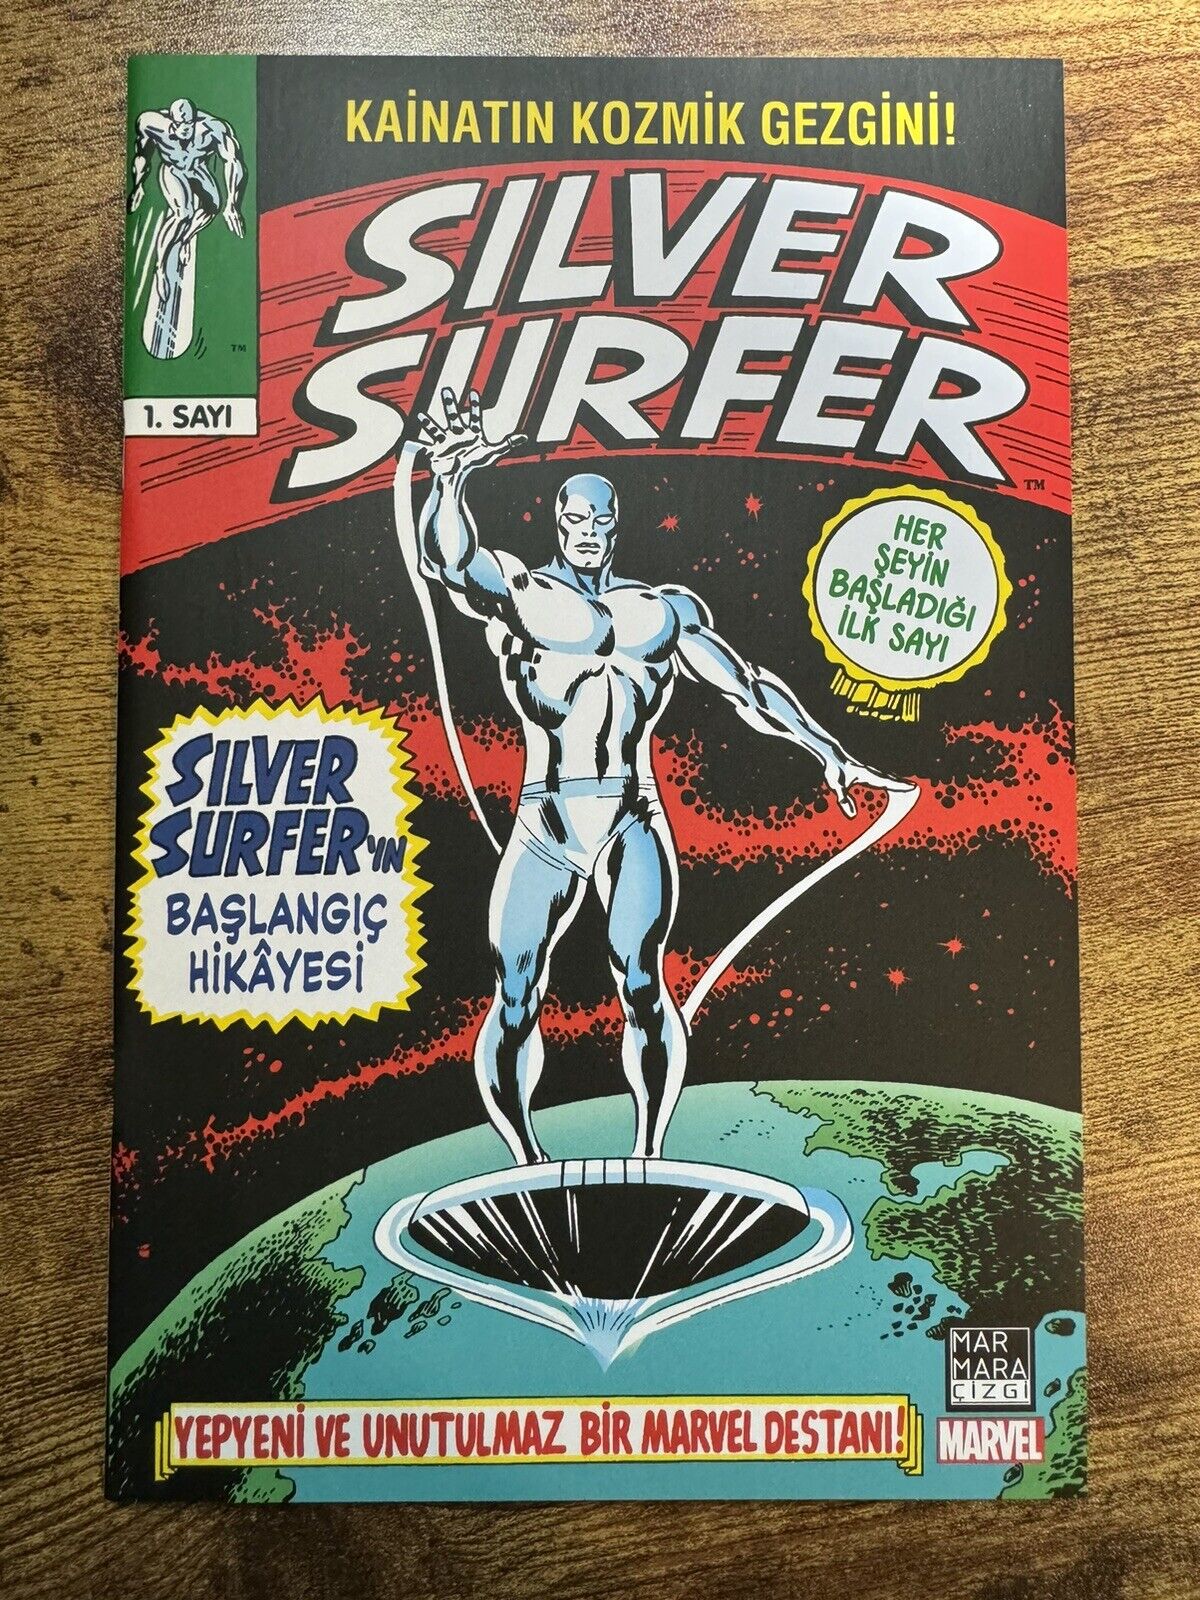 SILVER SURFER #1 RARE TURKISH COMIC EDITION MARVEL 1ST SOLO SERIES WATCHERS